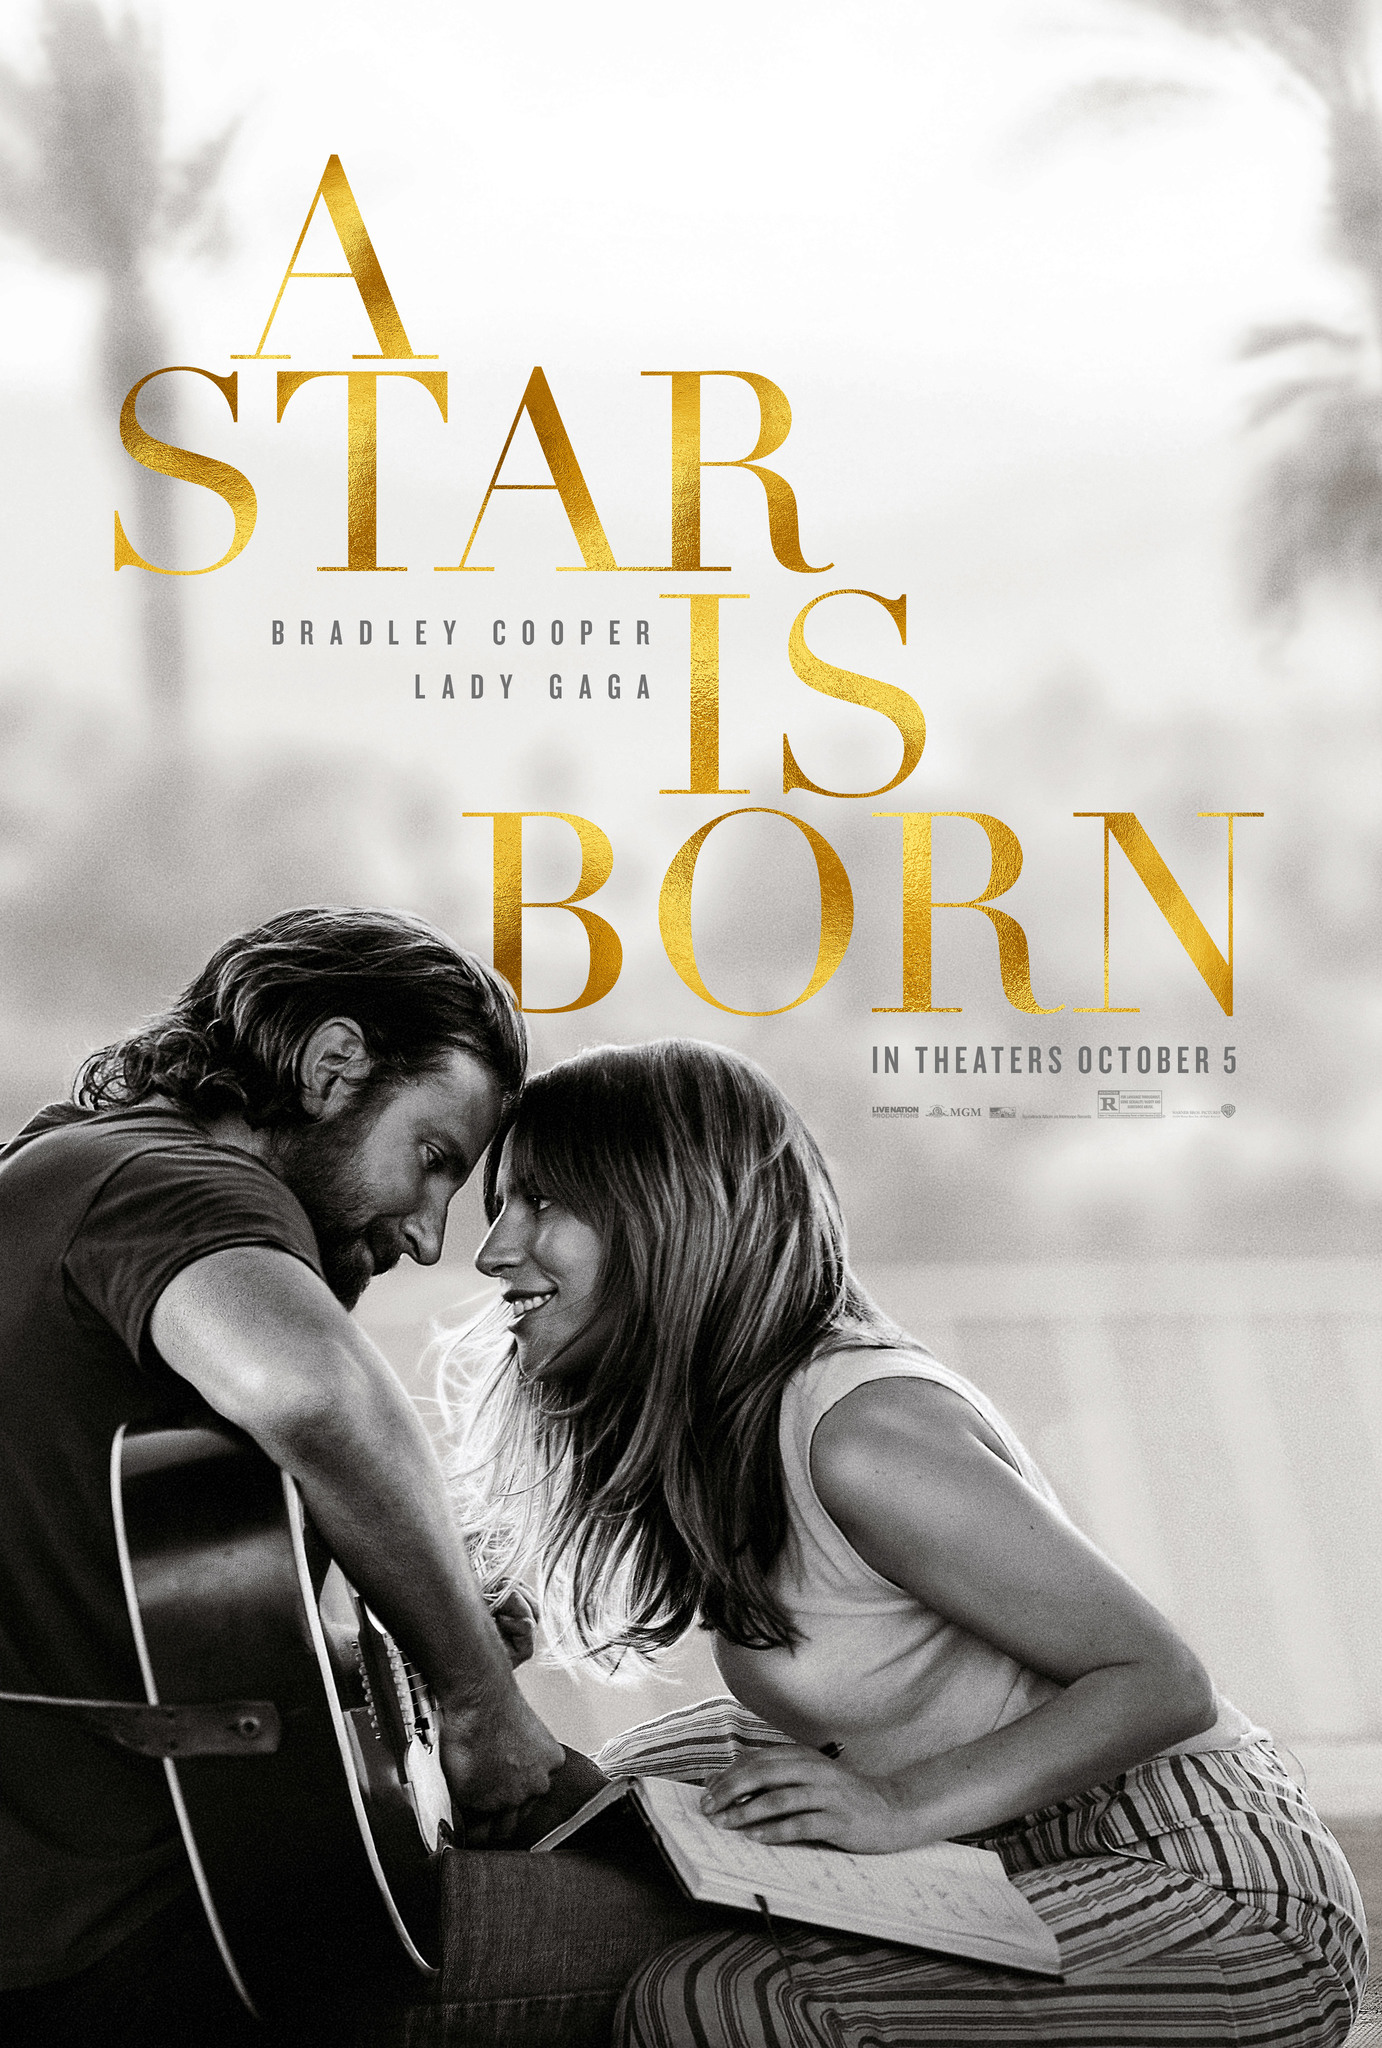 REVIEW: “A Star is Born” is a must see